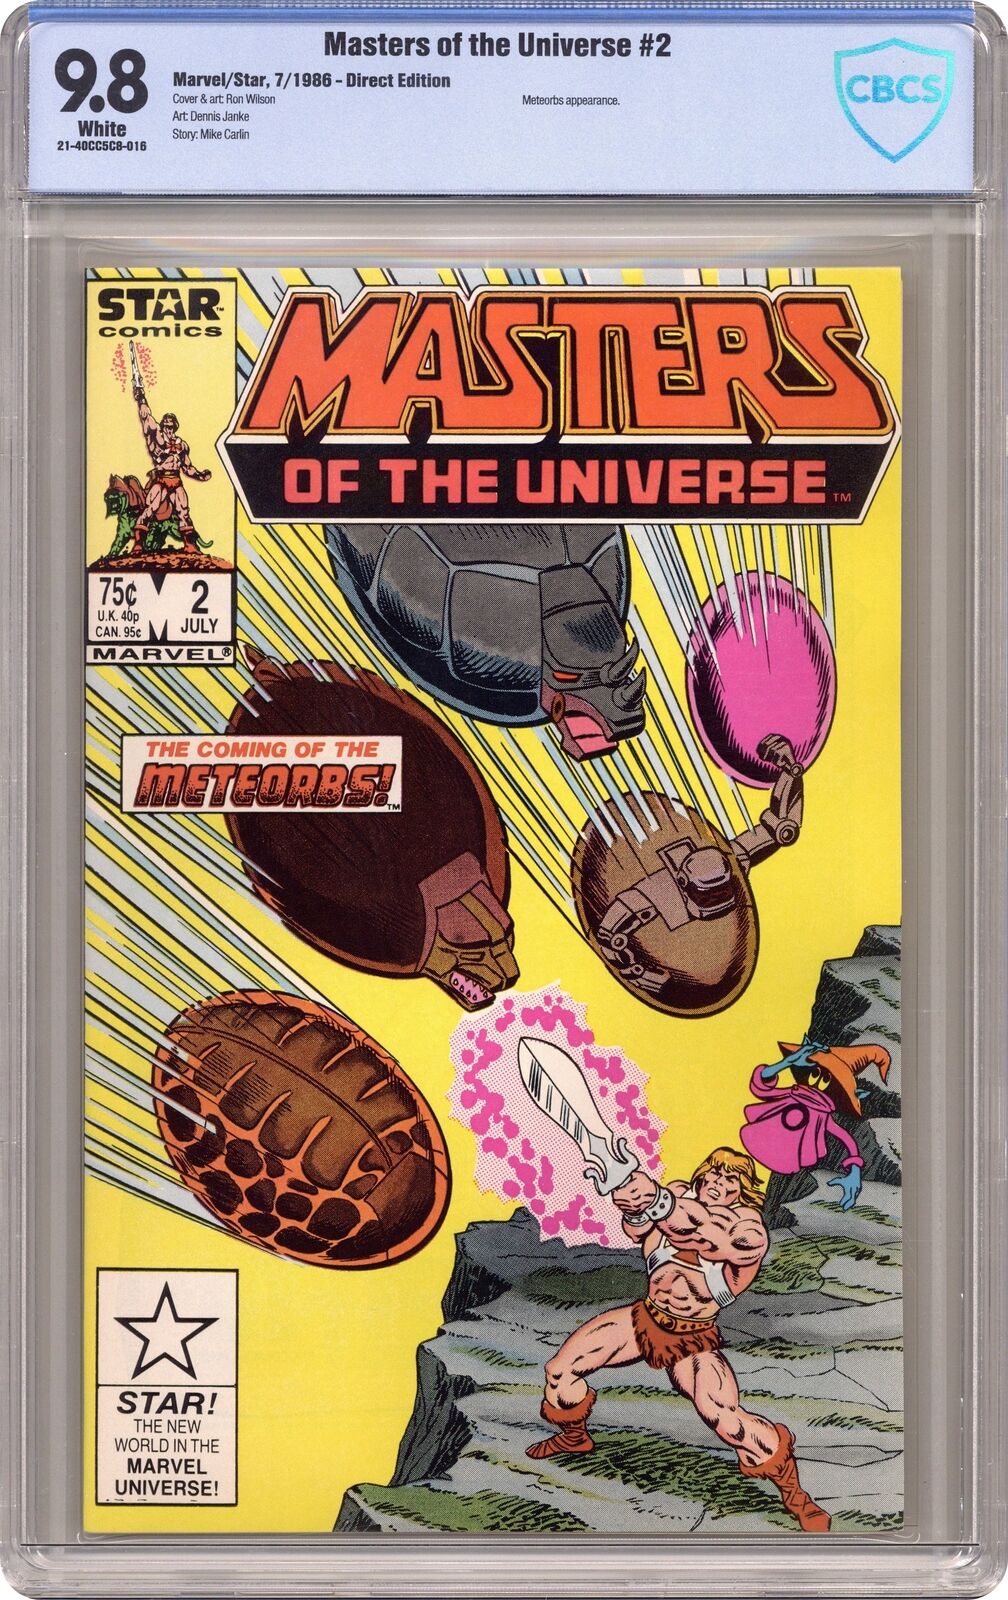 Masters of the Universe #2 CBCS 9.8 1986 21-40CC5C8-016